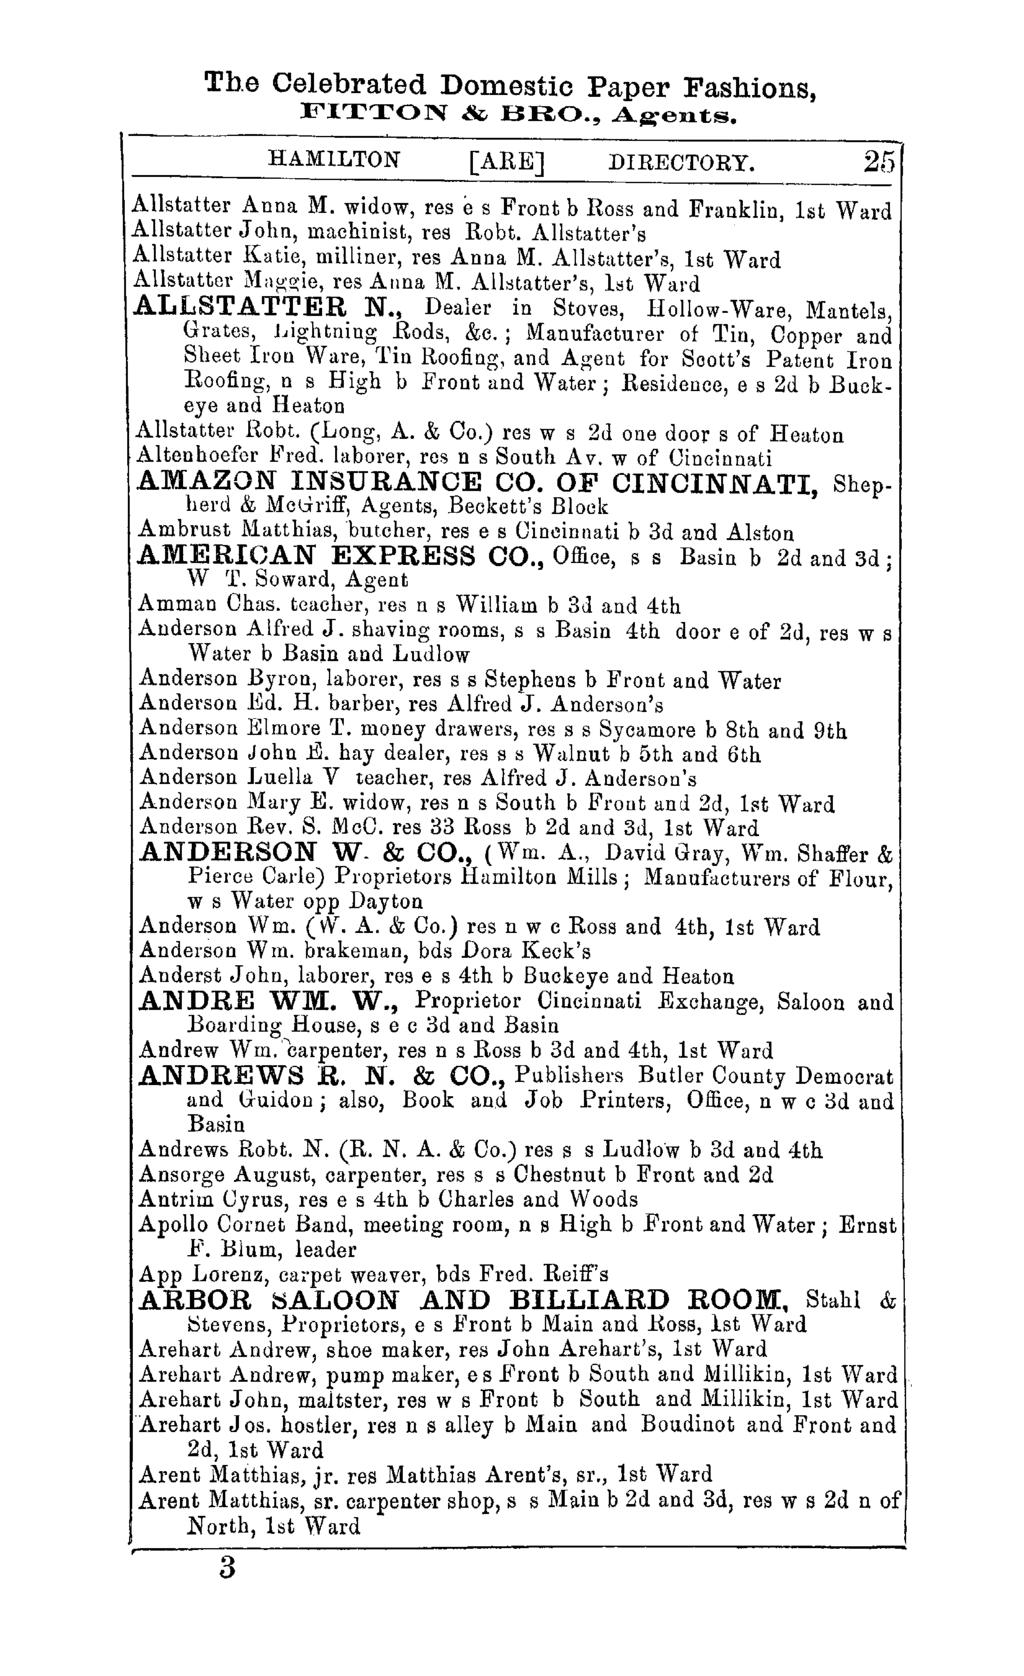 The Celebrated Domestic Paper Fashions, FITTON & BRO., A~en.ts. HAMILTON [ARE] DIRECTORY. 25 Allstatter Anna M. widow, res e s Front b Ross and Franklin, 1st Ward Allstatter John, machinist, res Robt.